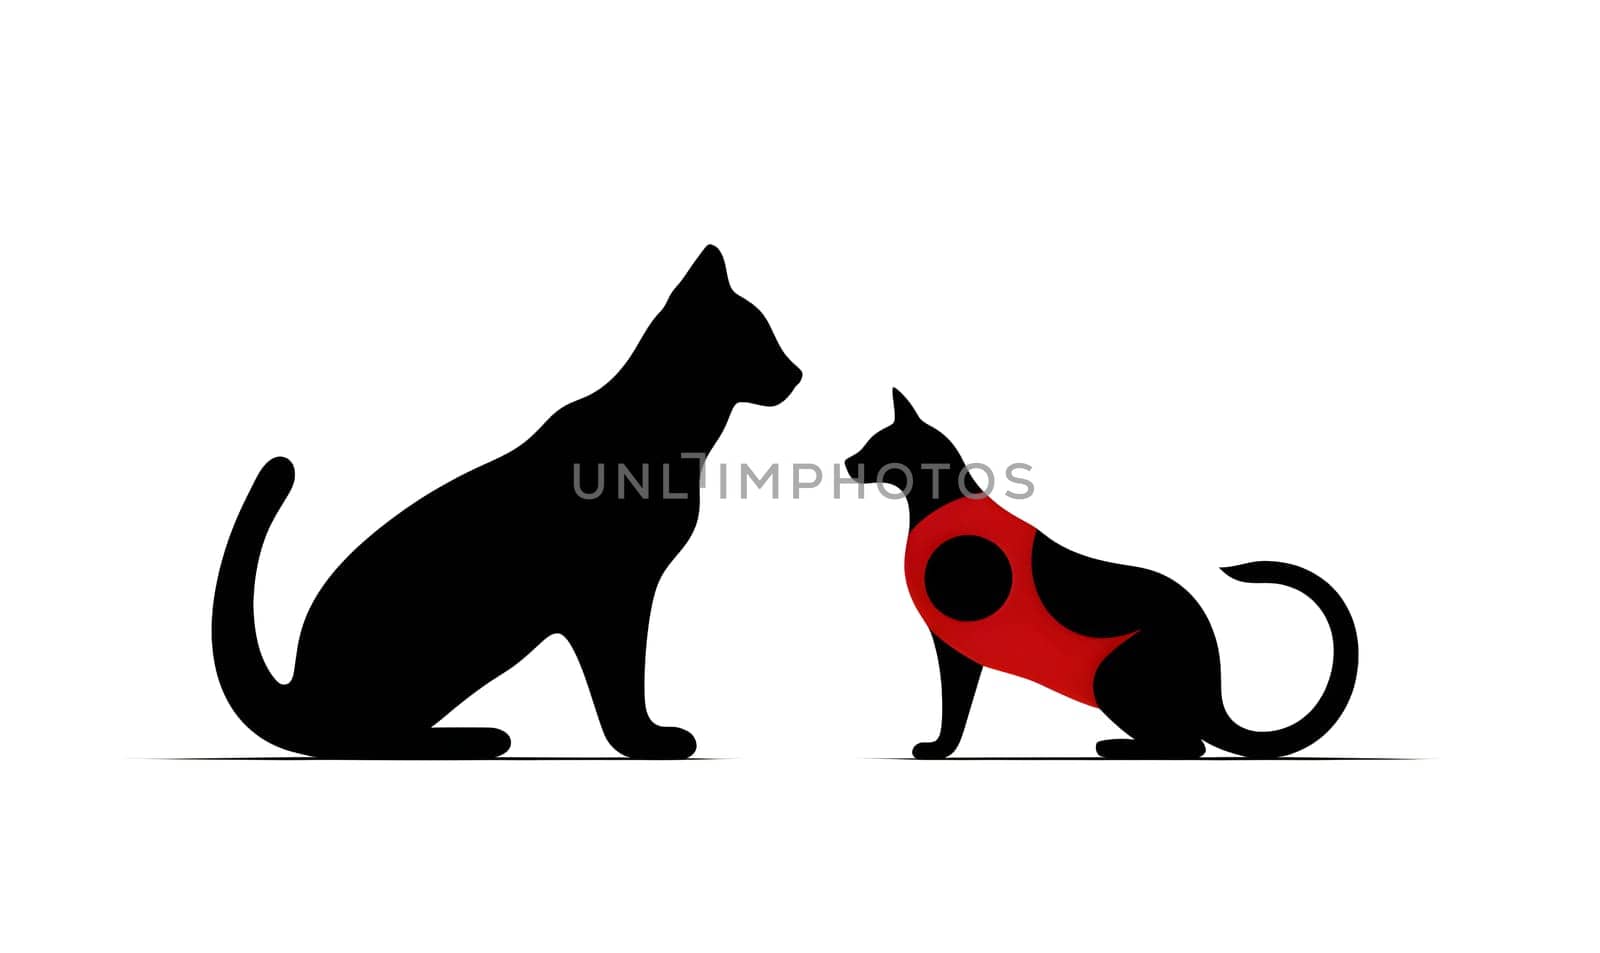 Vector illustration of a two cats in black silhouette against a clean white background, capturing graceful forms.